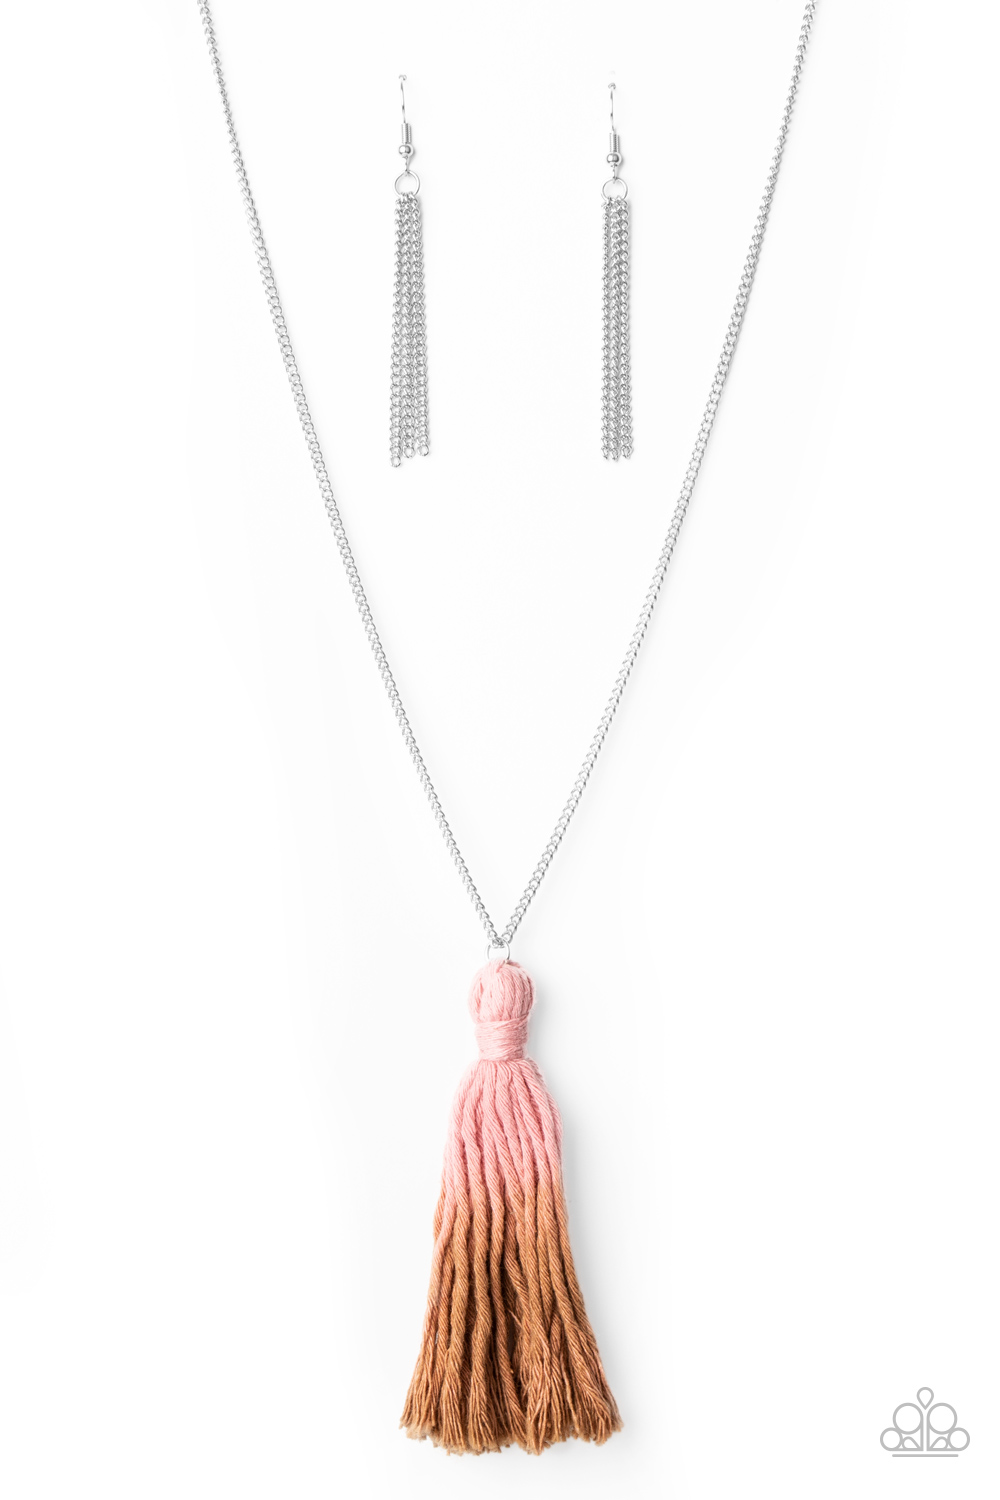 Necklace - Totally Tasseled - Pink